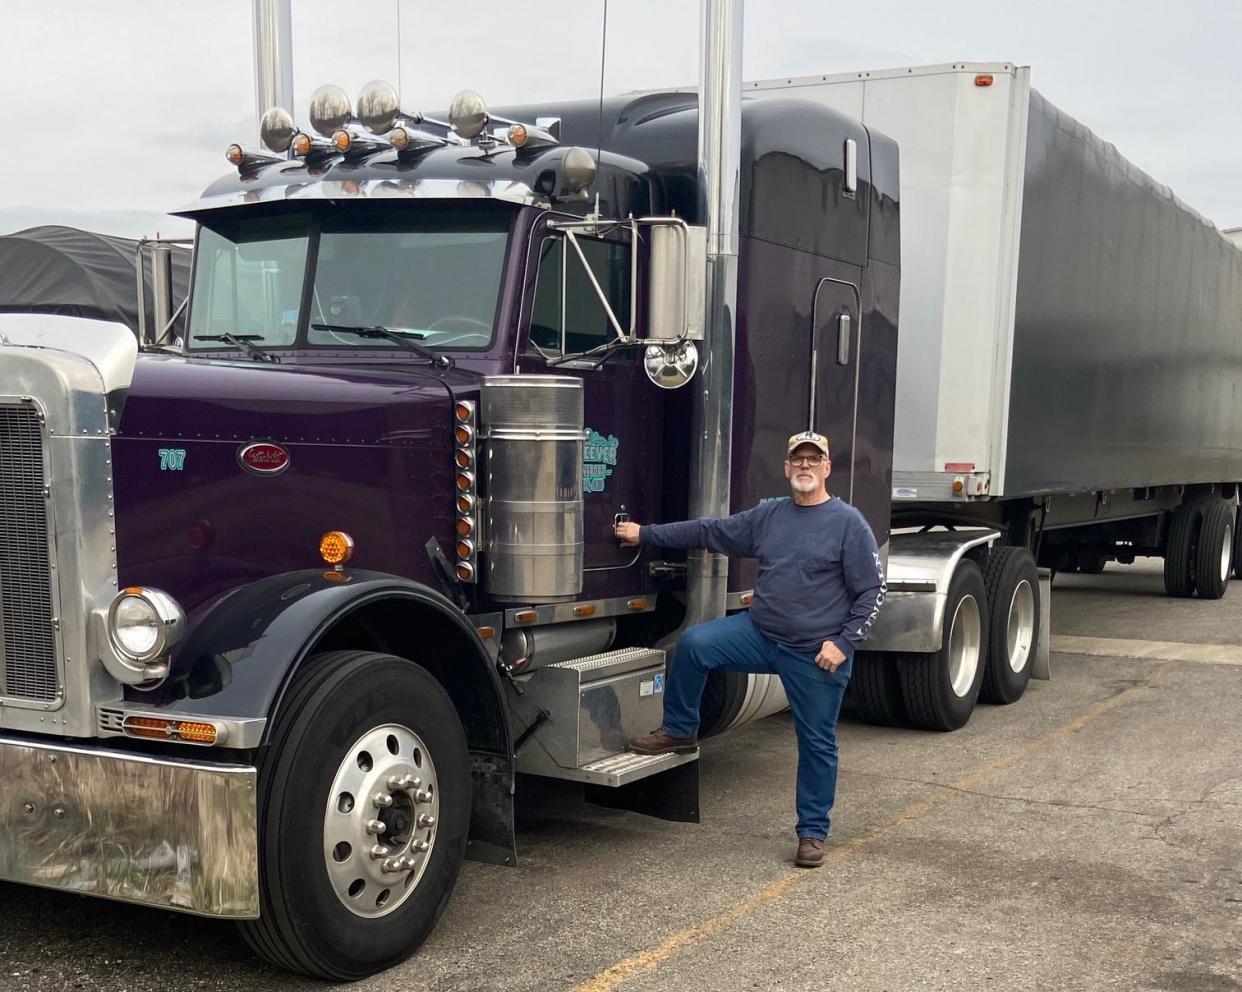 Monte Wiederhold likes to a nice sit-down meal to start and end his long days on the road, but says many truck stops no longer offer restaurants, though there is fast food.